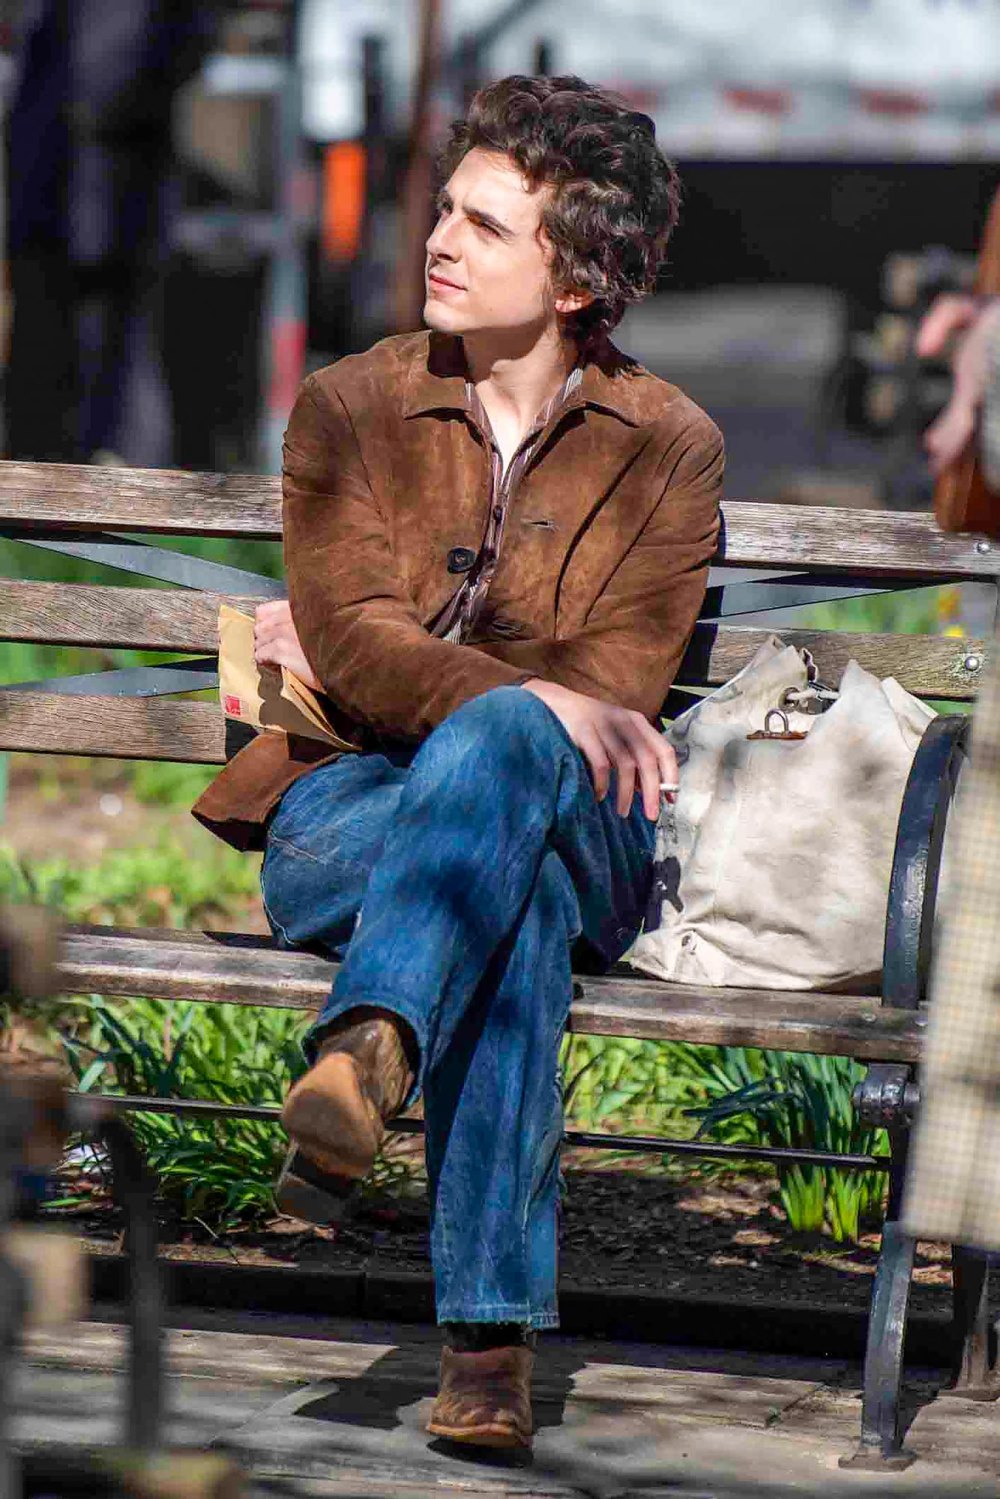 Timothee Chalamet Transforms Into Bob Dylan In Iconic Brown Suede Jacket and Sunglasses 2